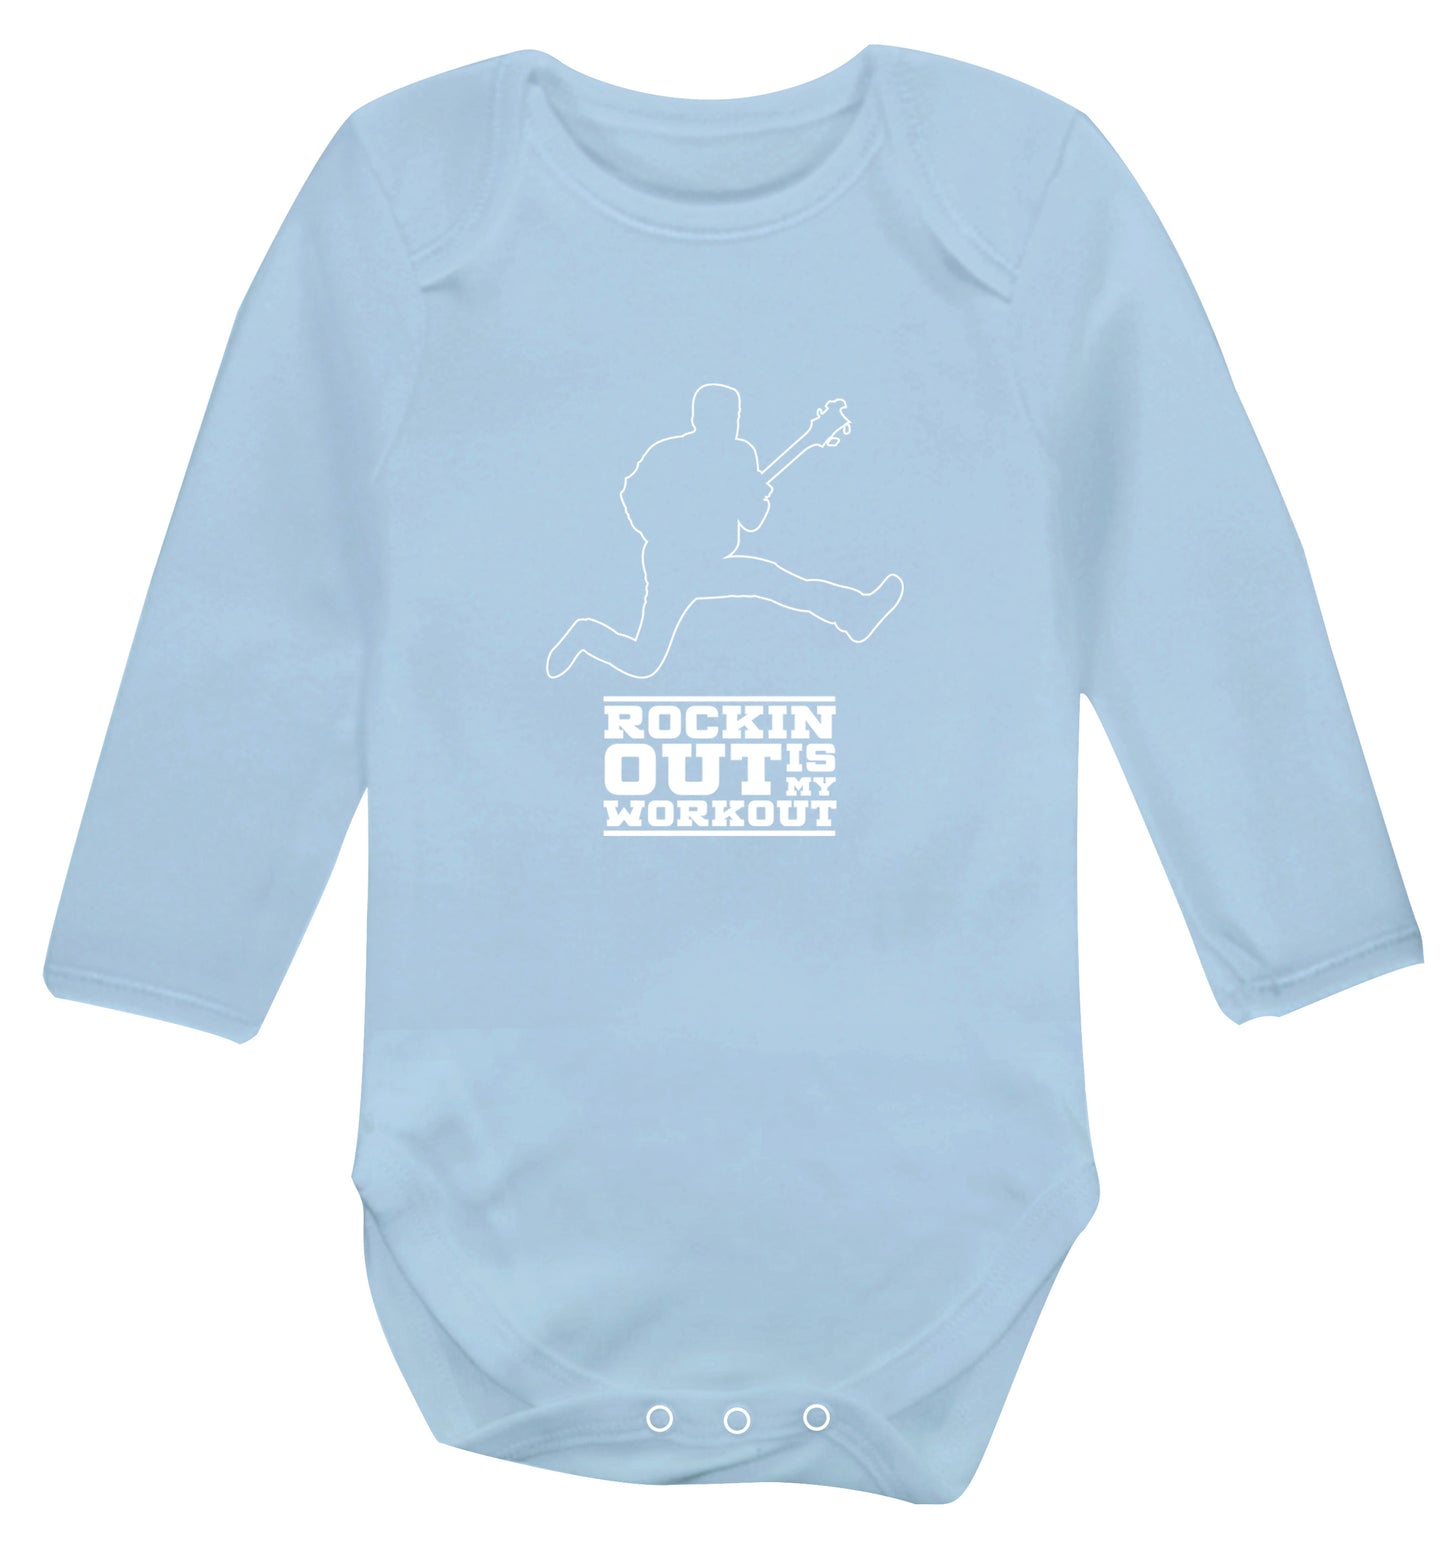 Rockin out is my workout 2 Baby Vest long sleeved pale blue 6-12 months